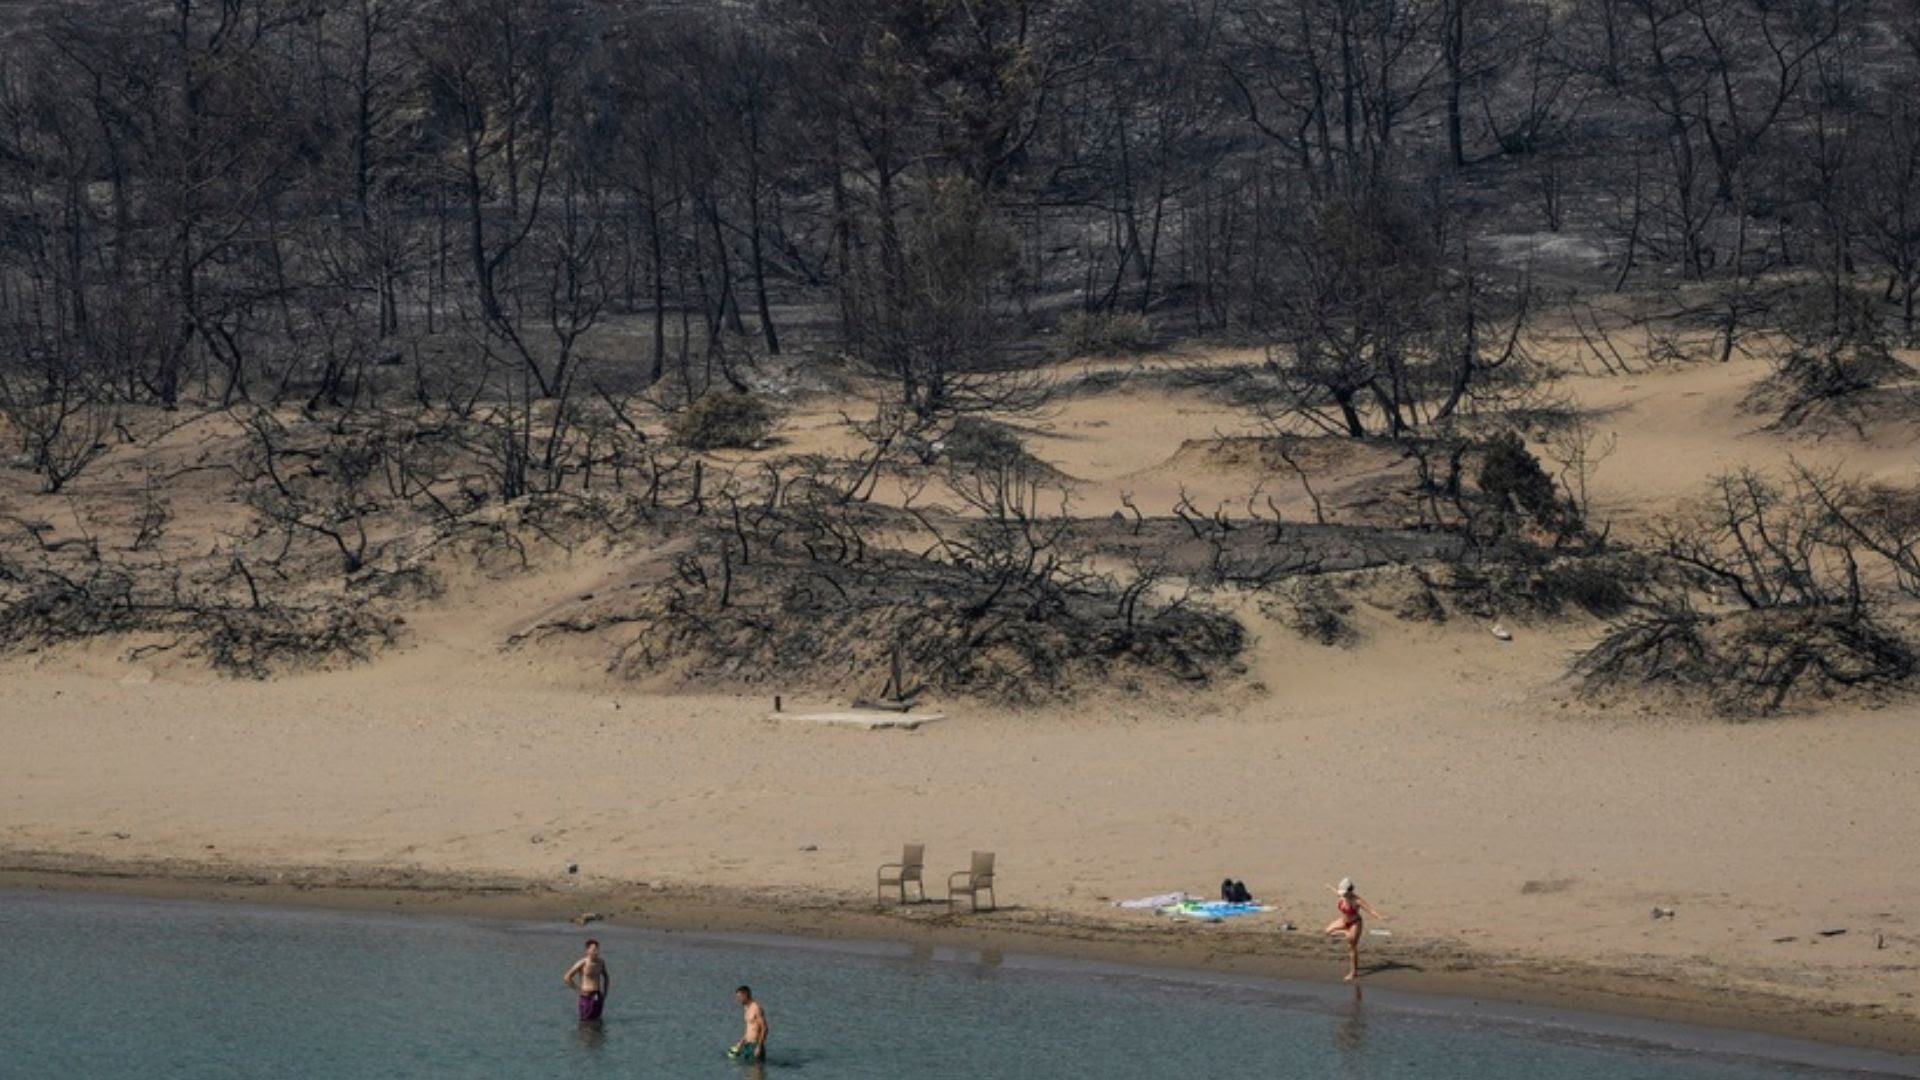 People gather on a beach on the Greek island of Rhodes, standing in front of charred trees and vegetation.